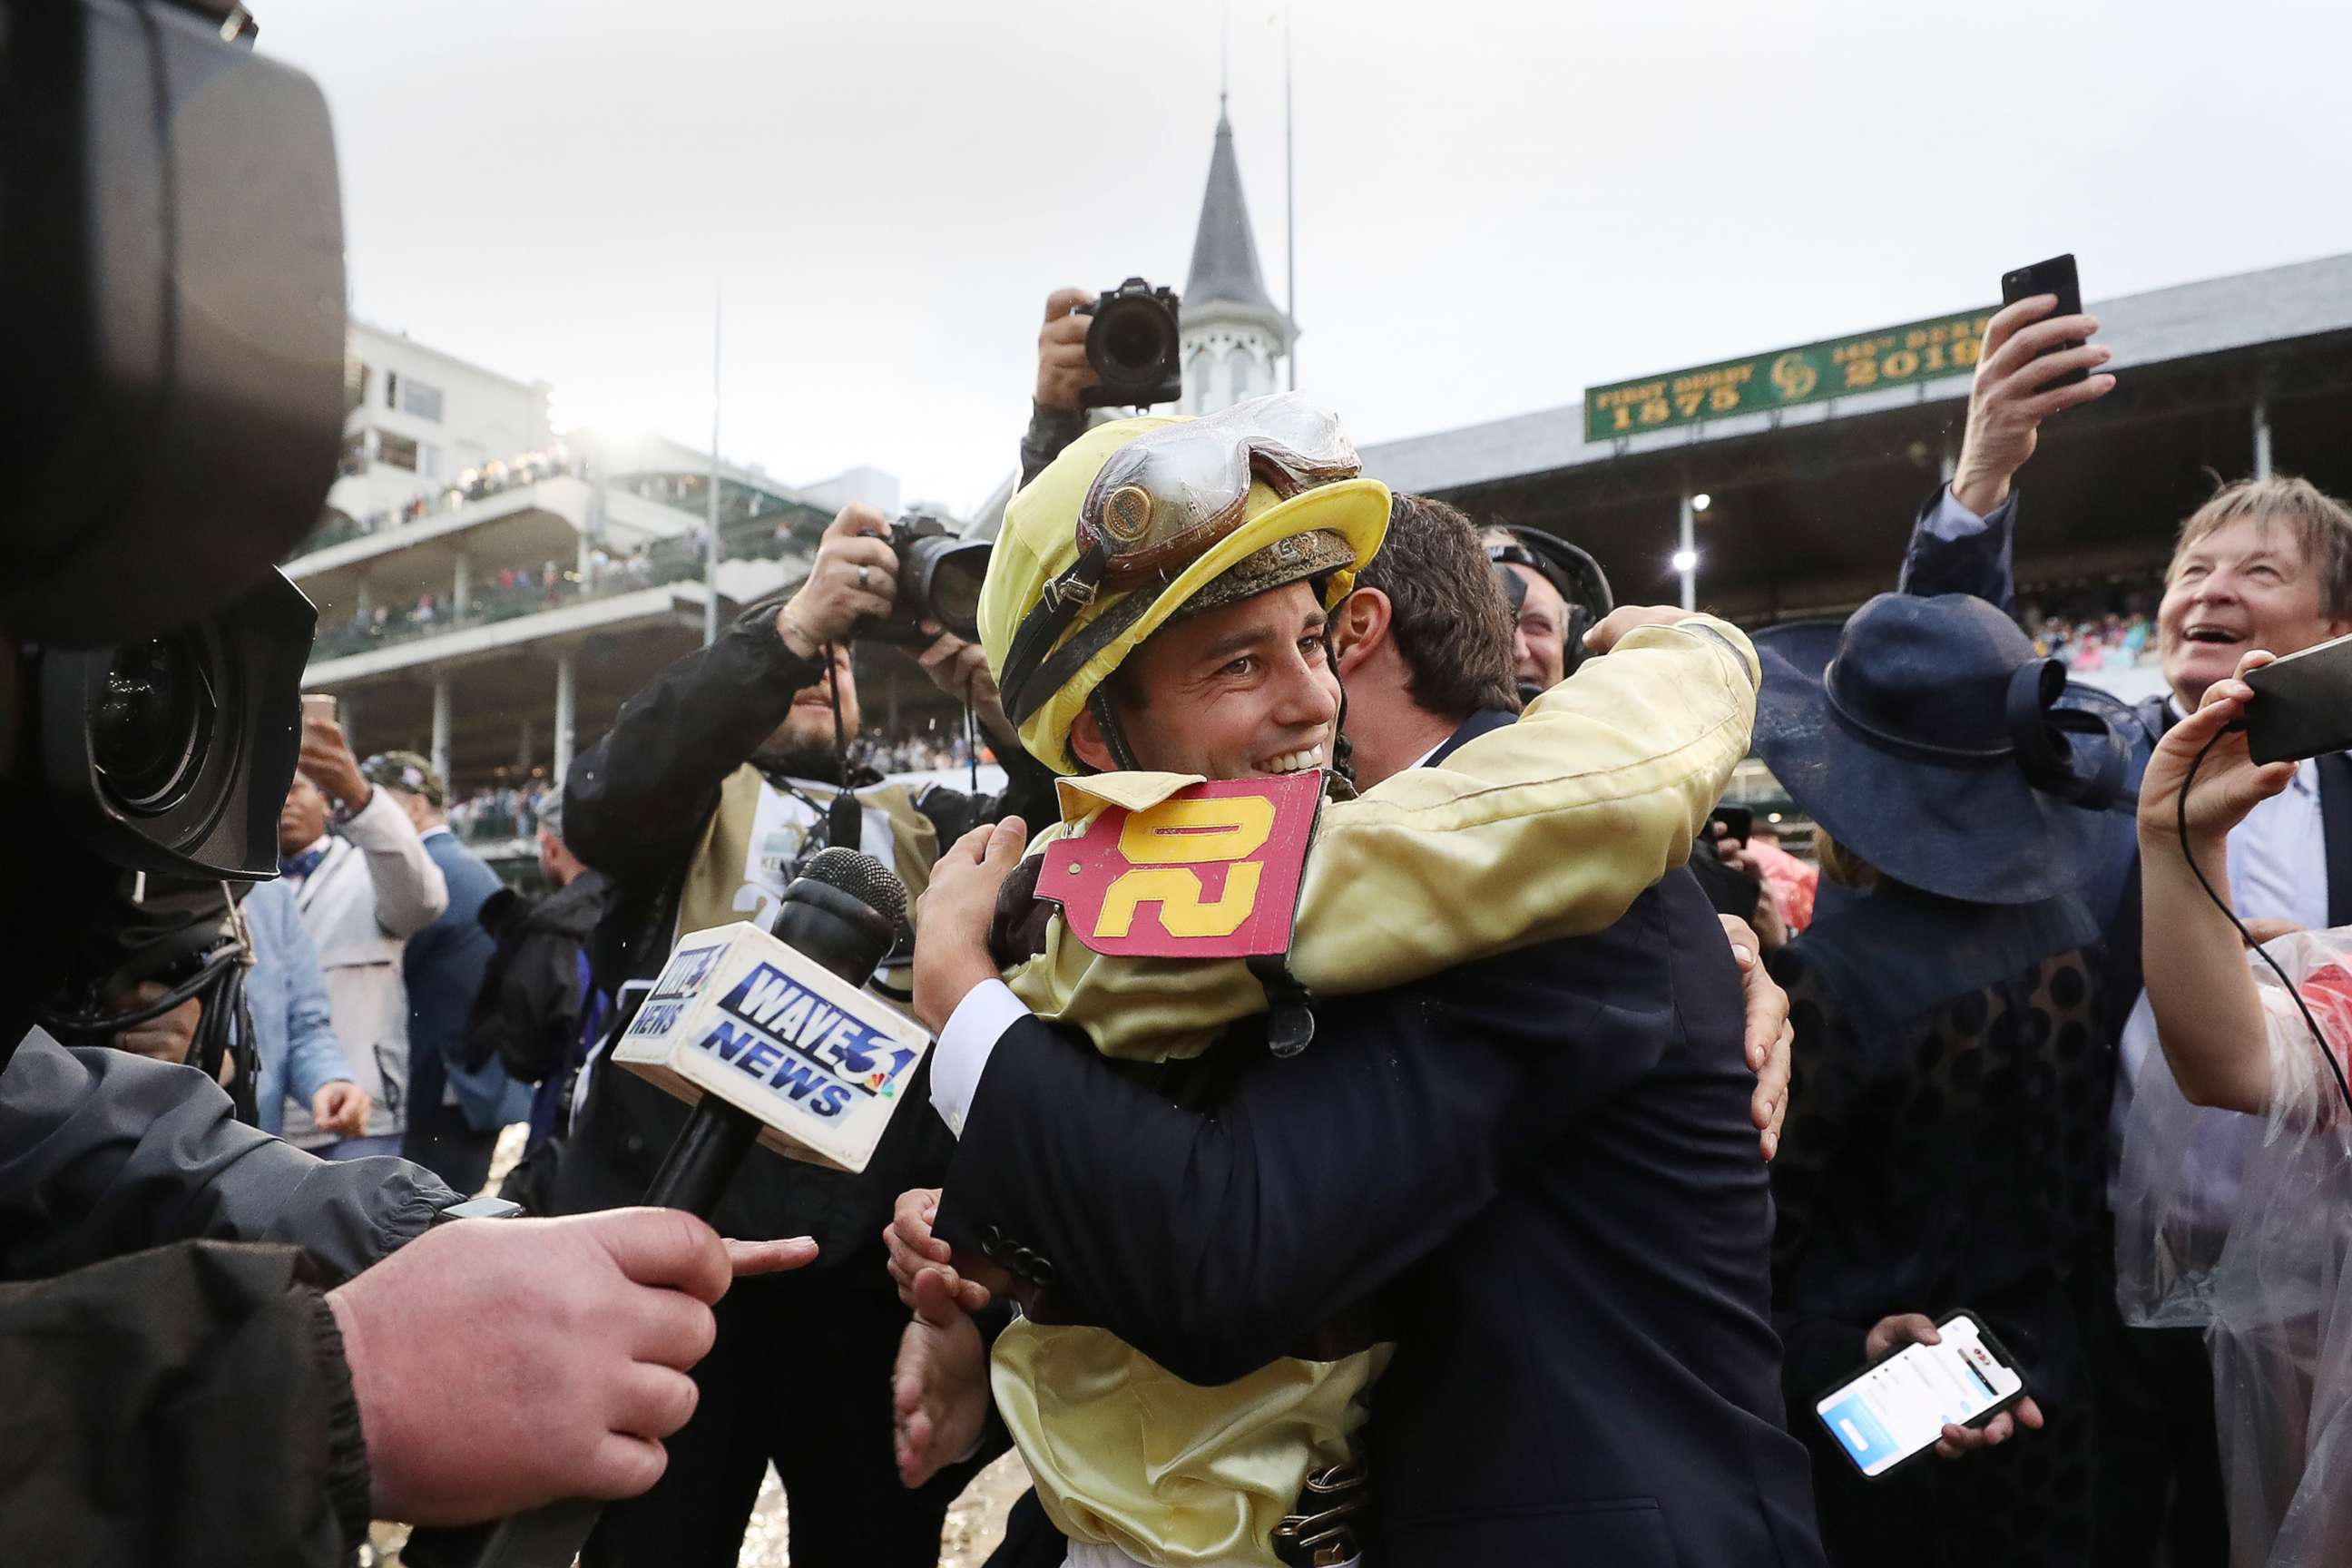 PHOTO: Jockey Flavien Prat celebrates after the Kentucky Derby aboard Country House at Churchill Downs, May 4, 2019 in Louisville, Ky.